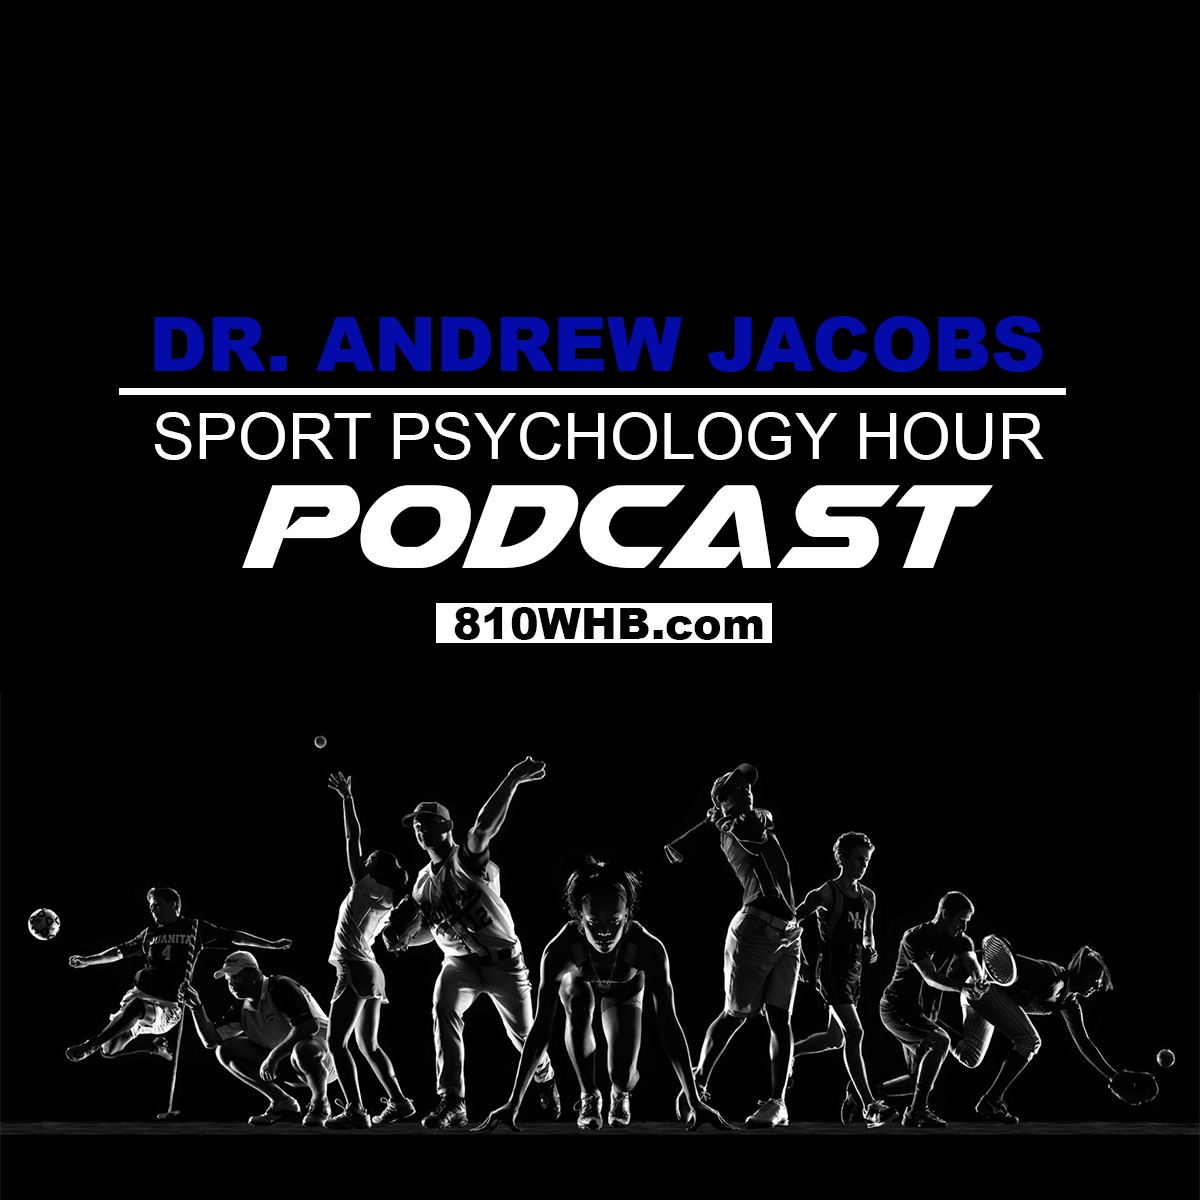 Dr. Andrew Jacobs - Sport Psychology Hour